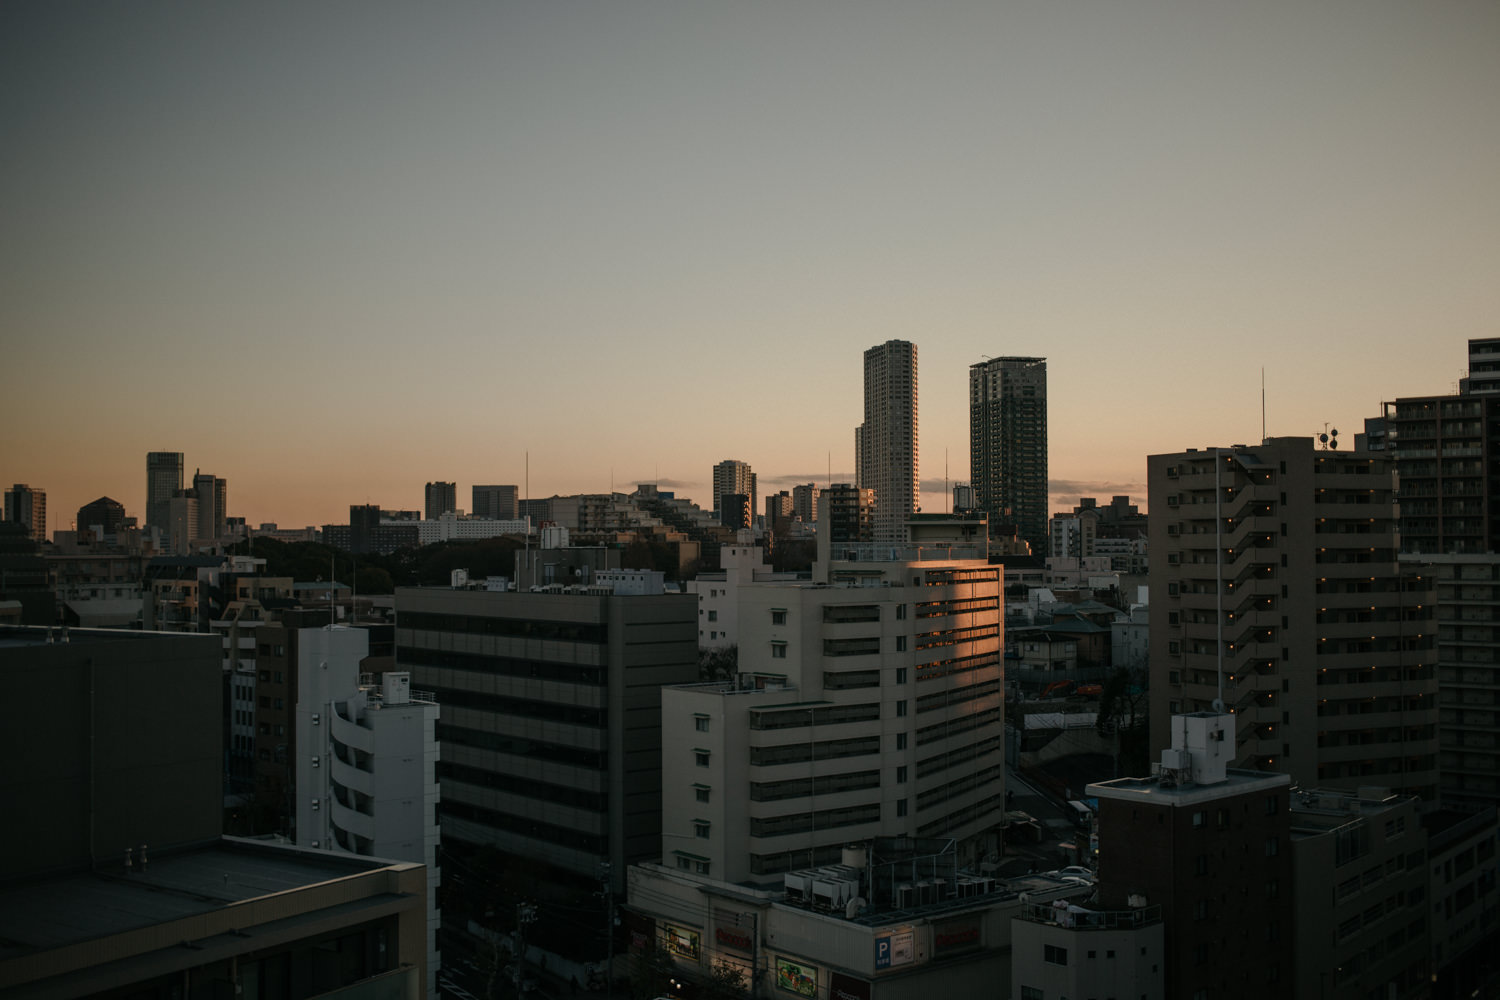 Tokyo photographed by Yann Audic